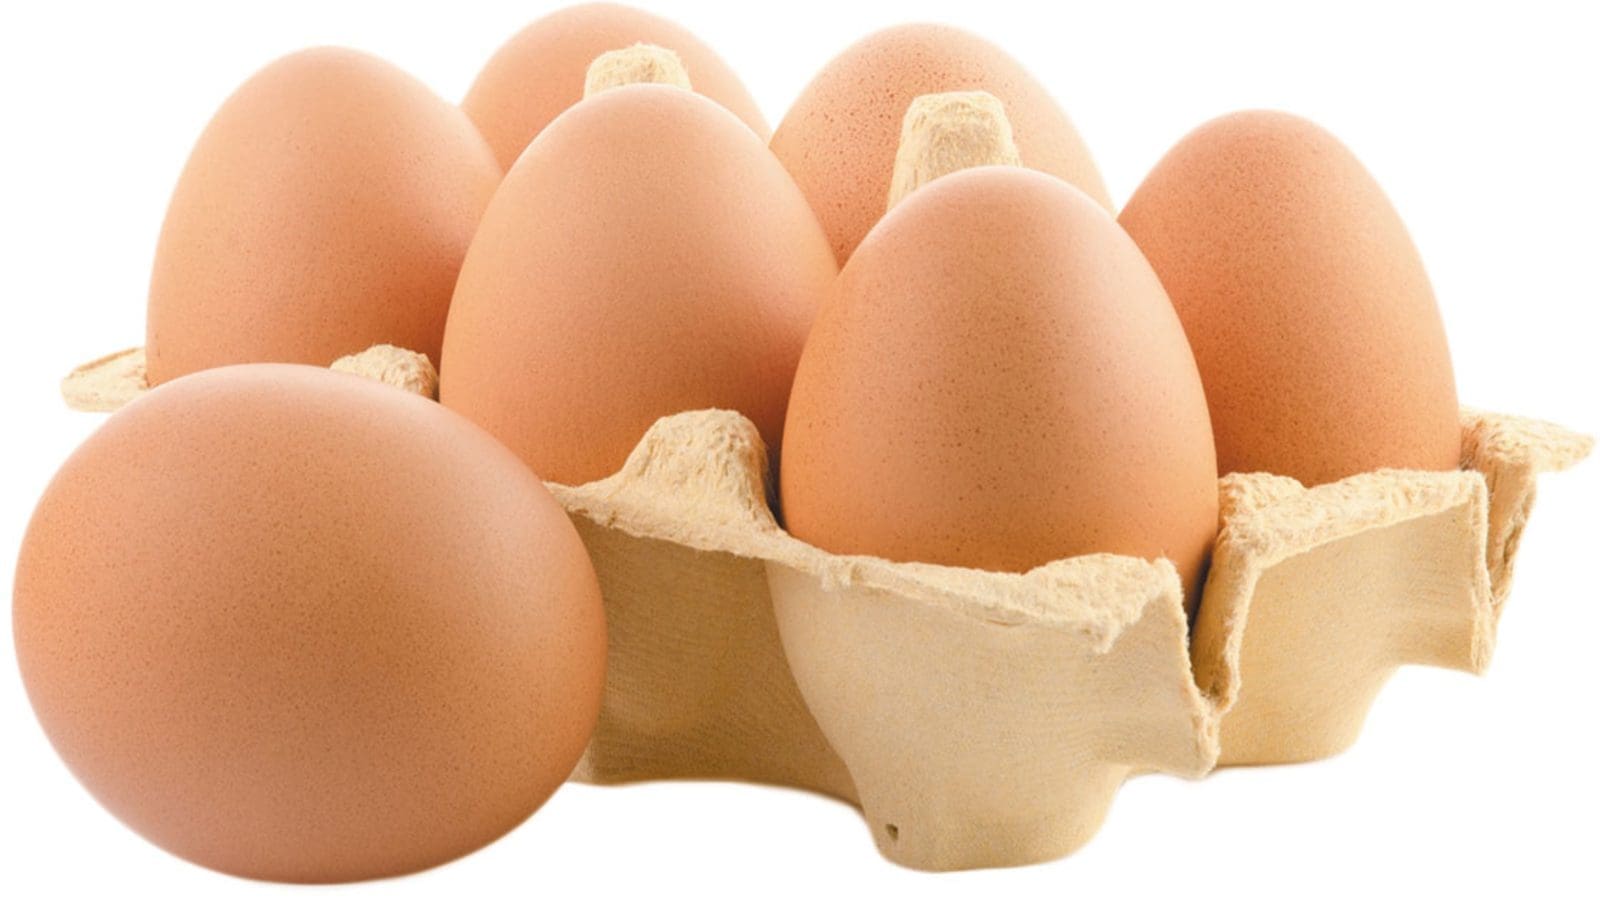 Cal-Maine Foods to acquire assets from Fassio egg farms